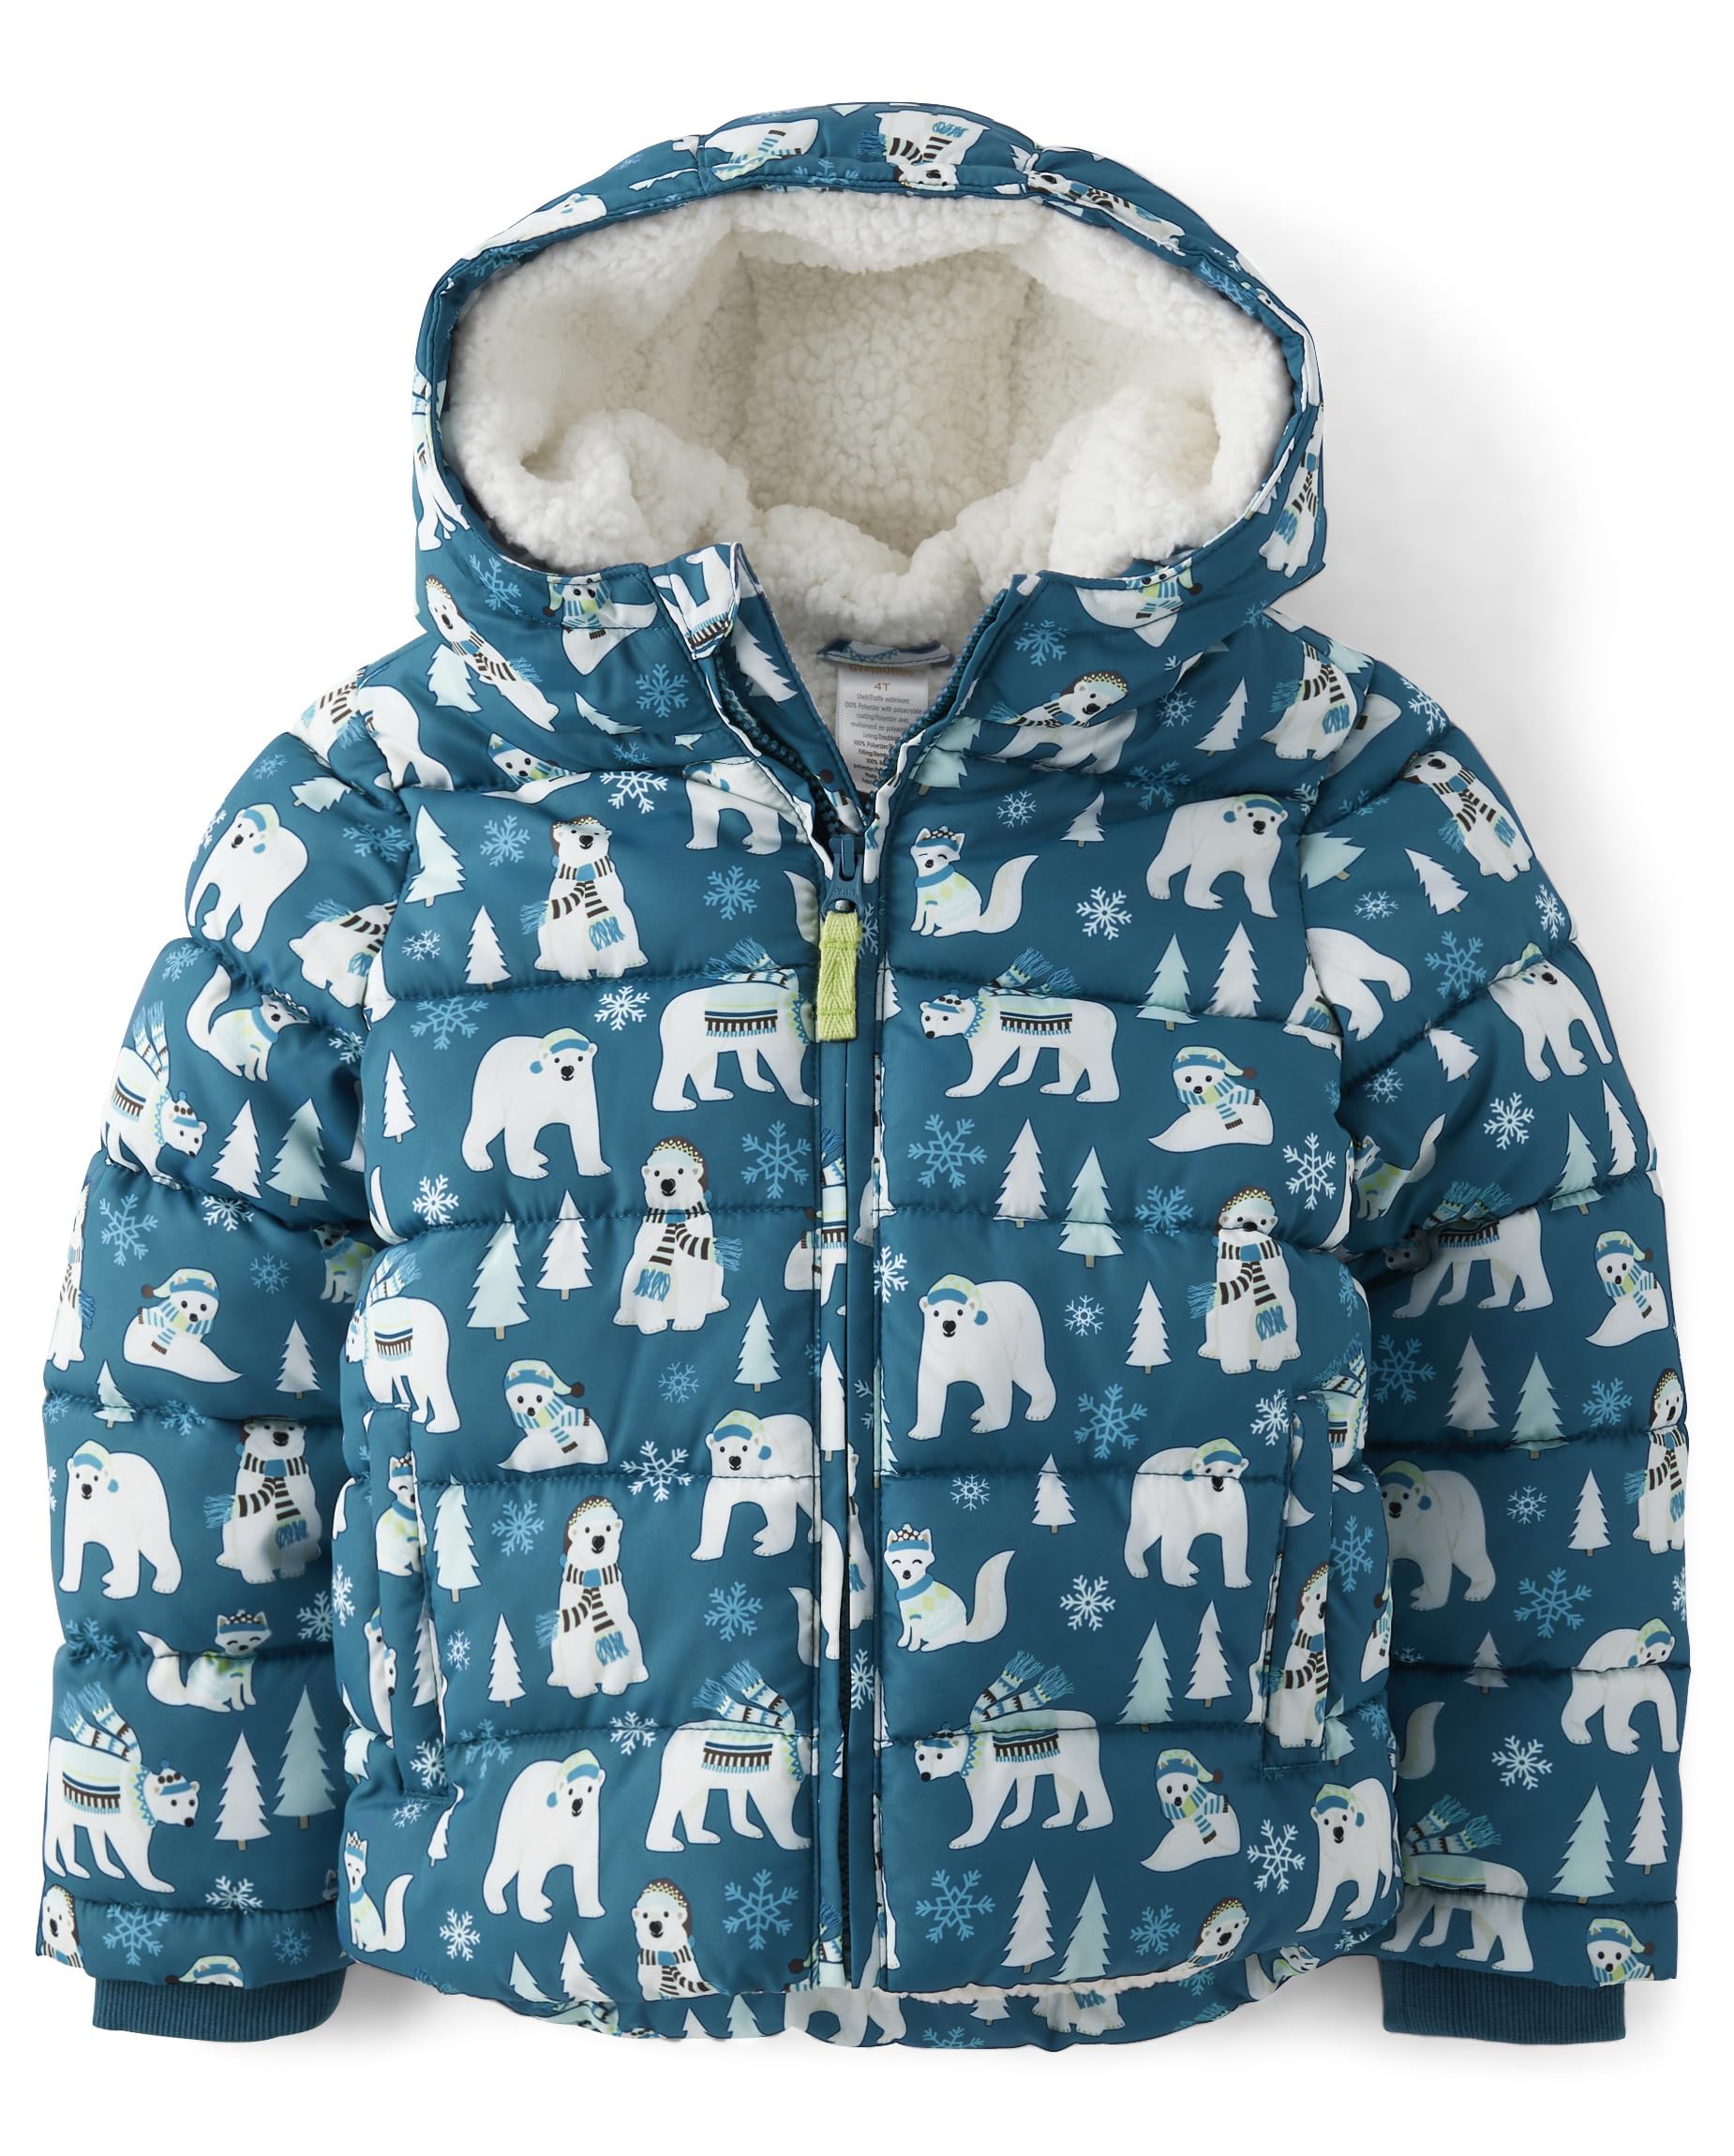 Gymboree,and Toddler Puffer Jacket,Nordic Puffer,2T